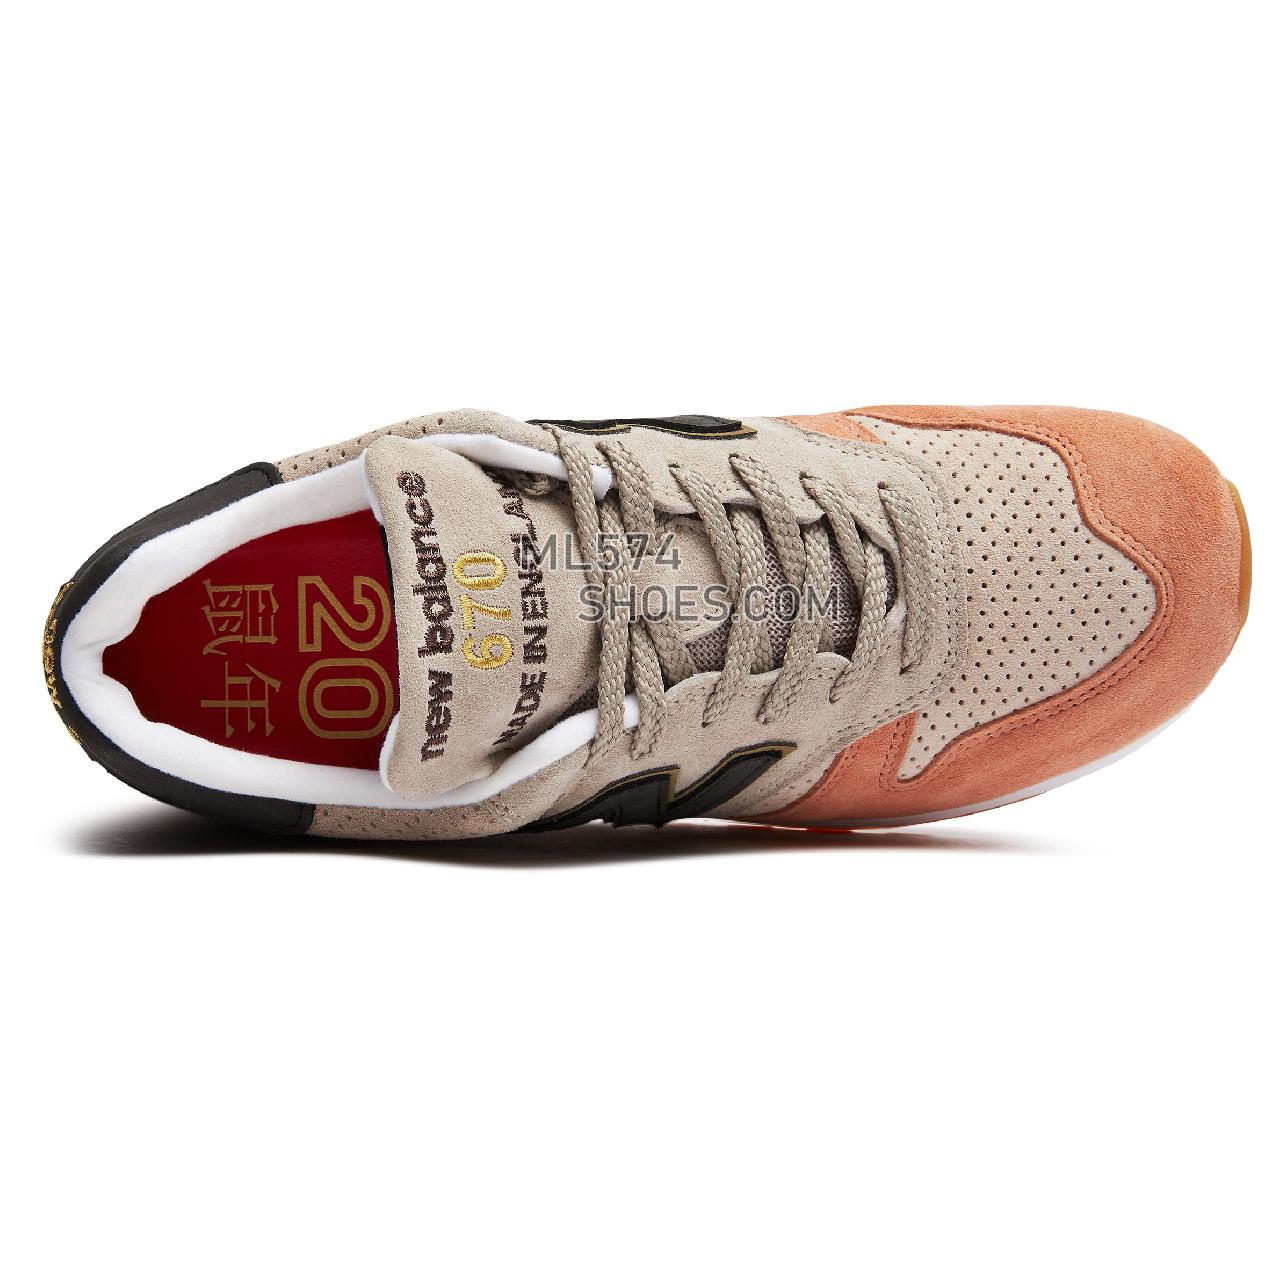 New Balance Made in UK 670 - Men's Made in USA And UK Sneakers - Nude with Pink and Grey - M670YOR